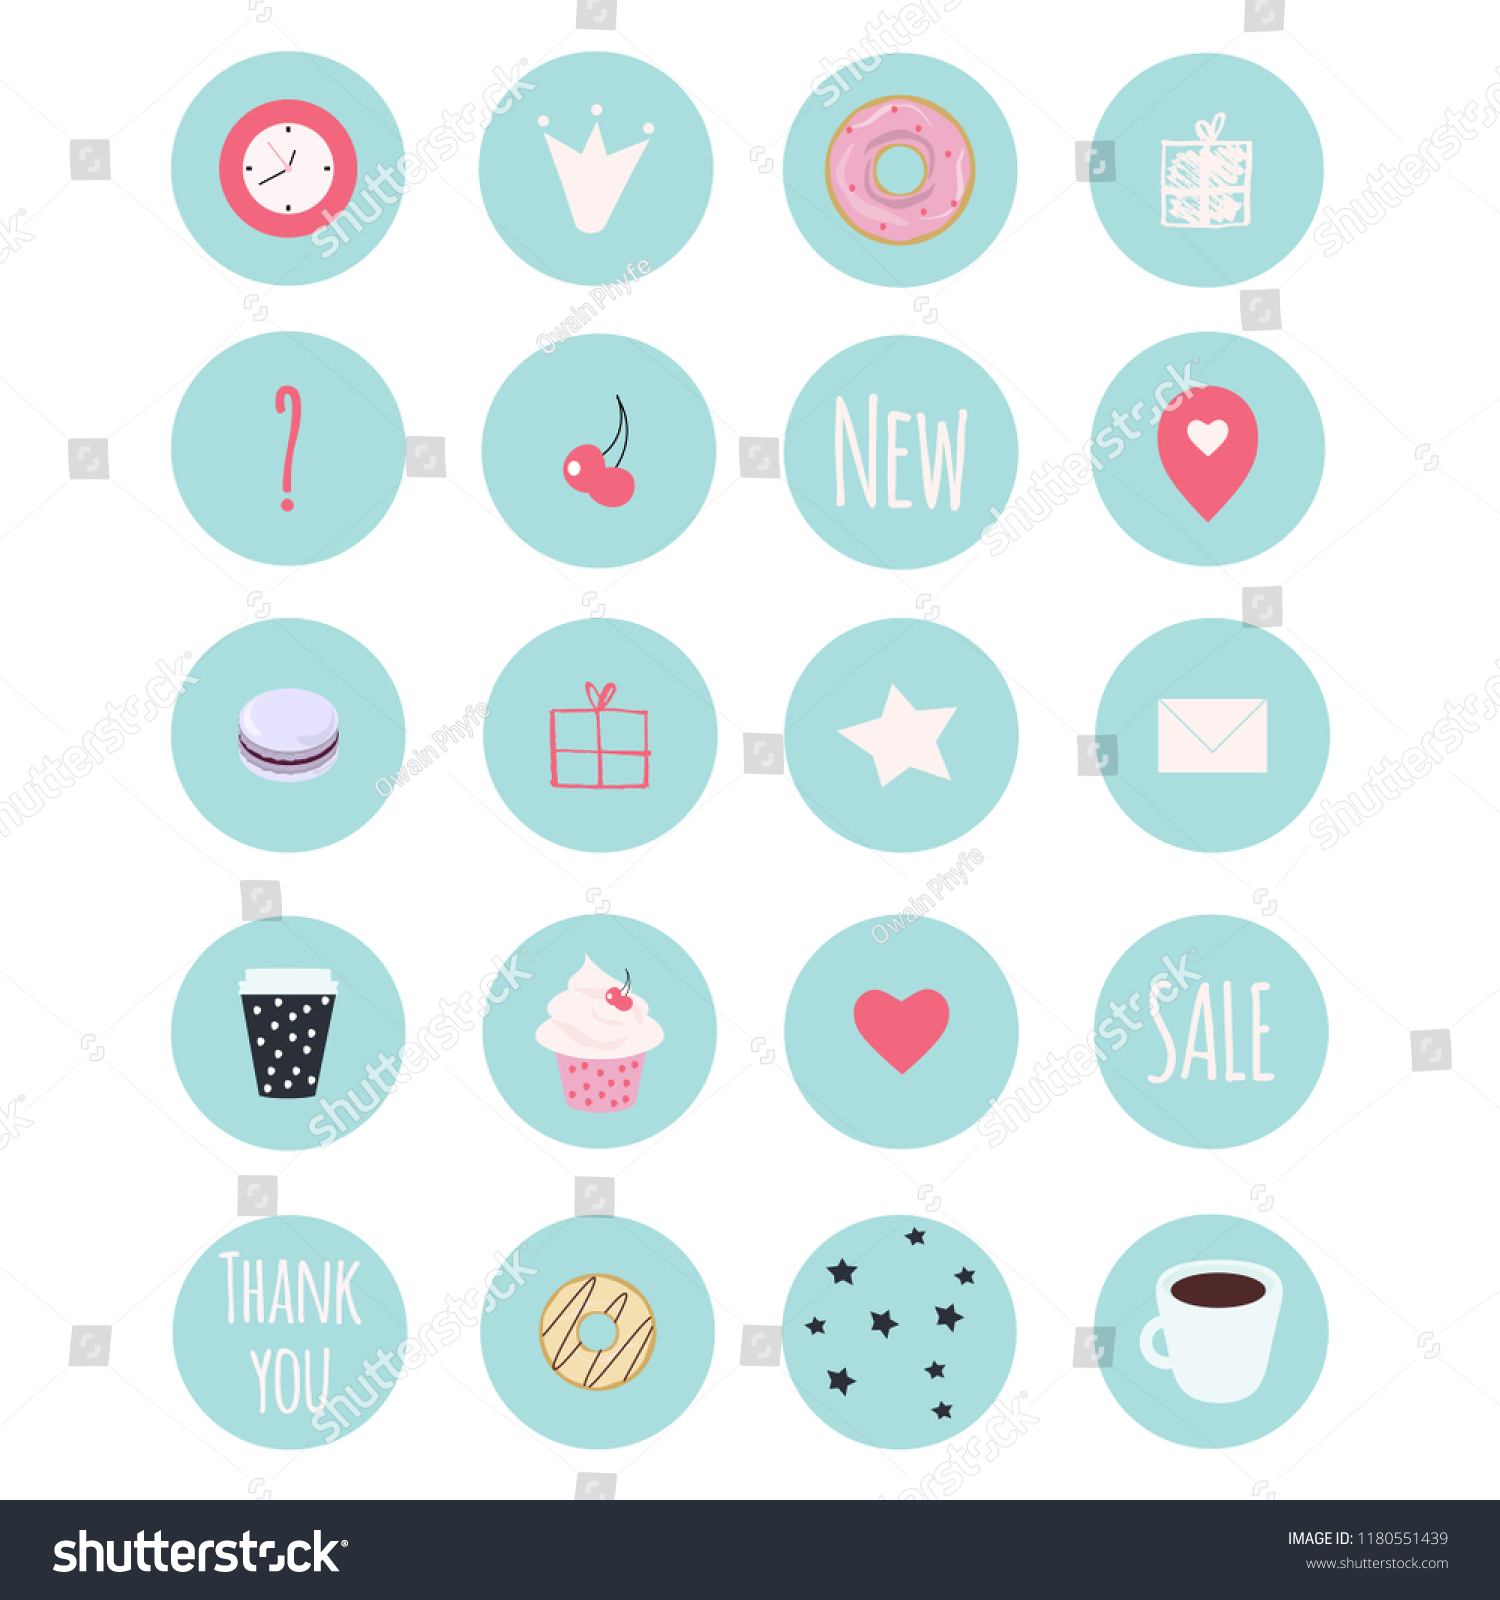 Set of 20 vector icons including sweets for your patisserie business, scrapbooking, bullet journalling, instagram history buttons, etc. Enjoy! #1180551439